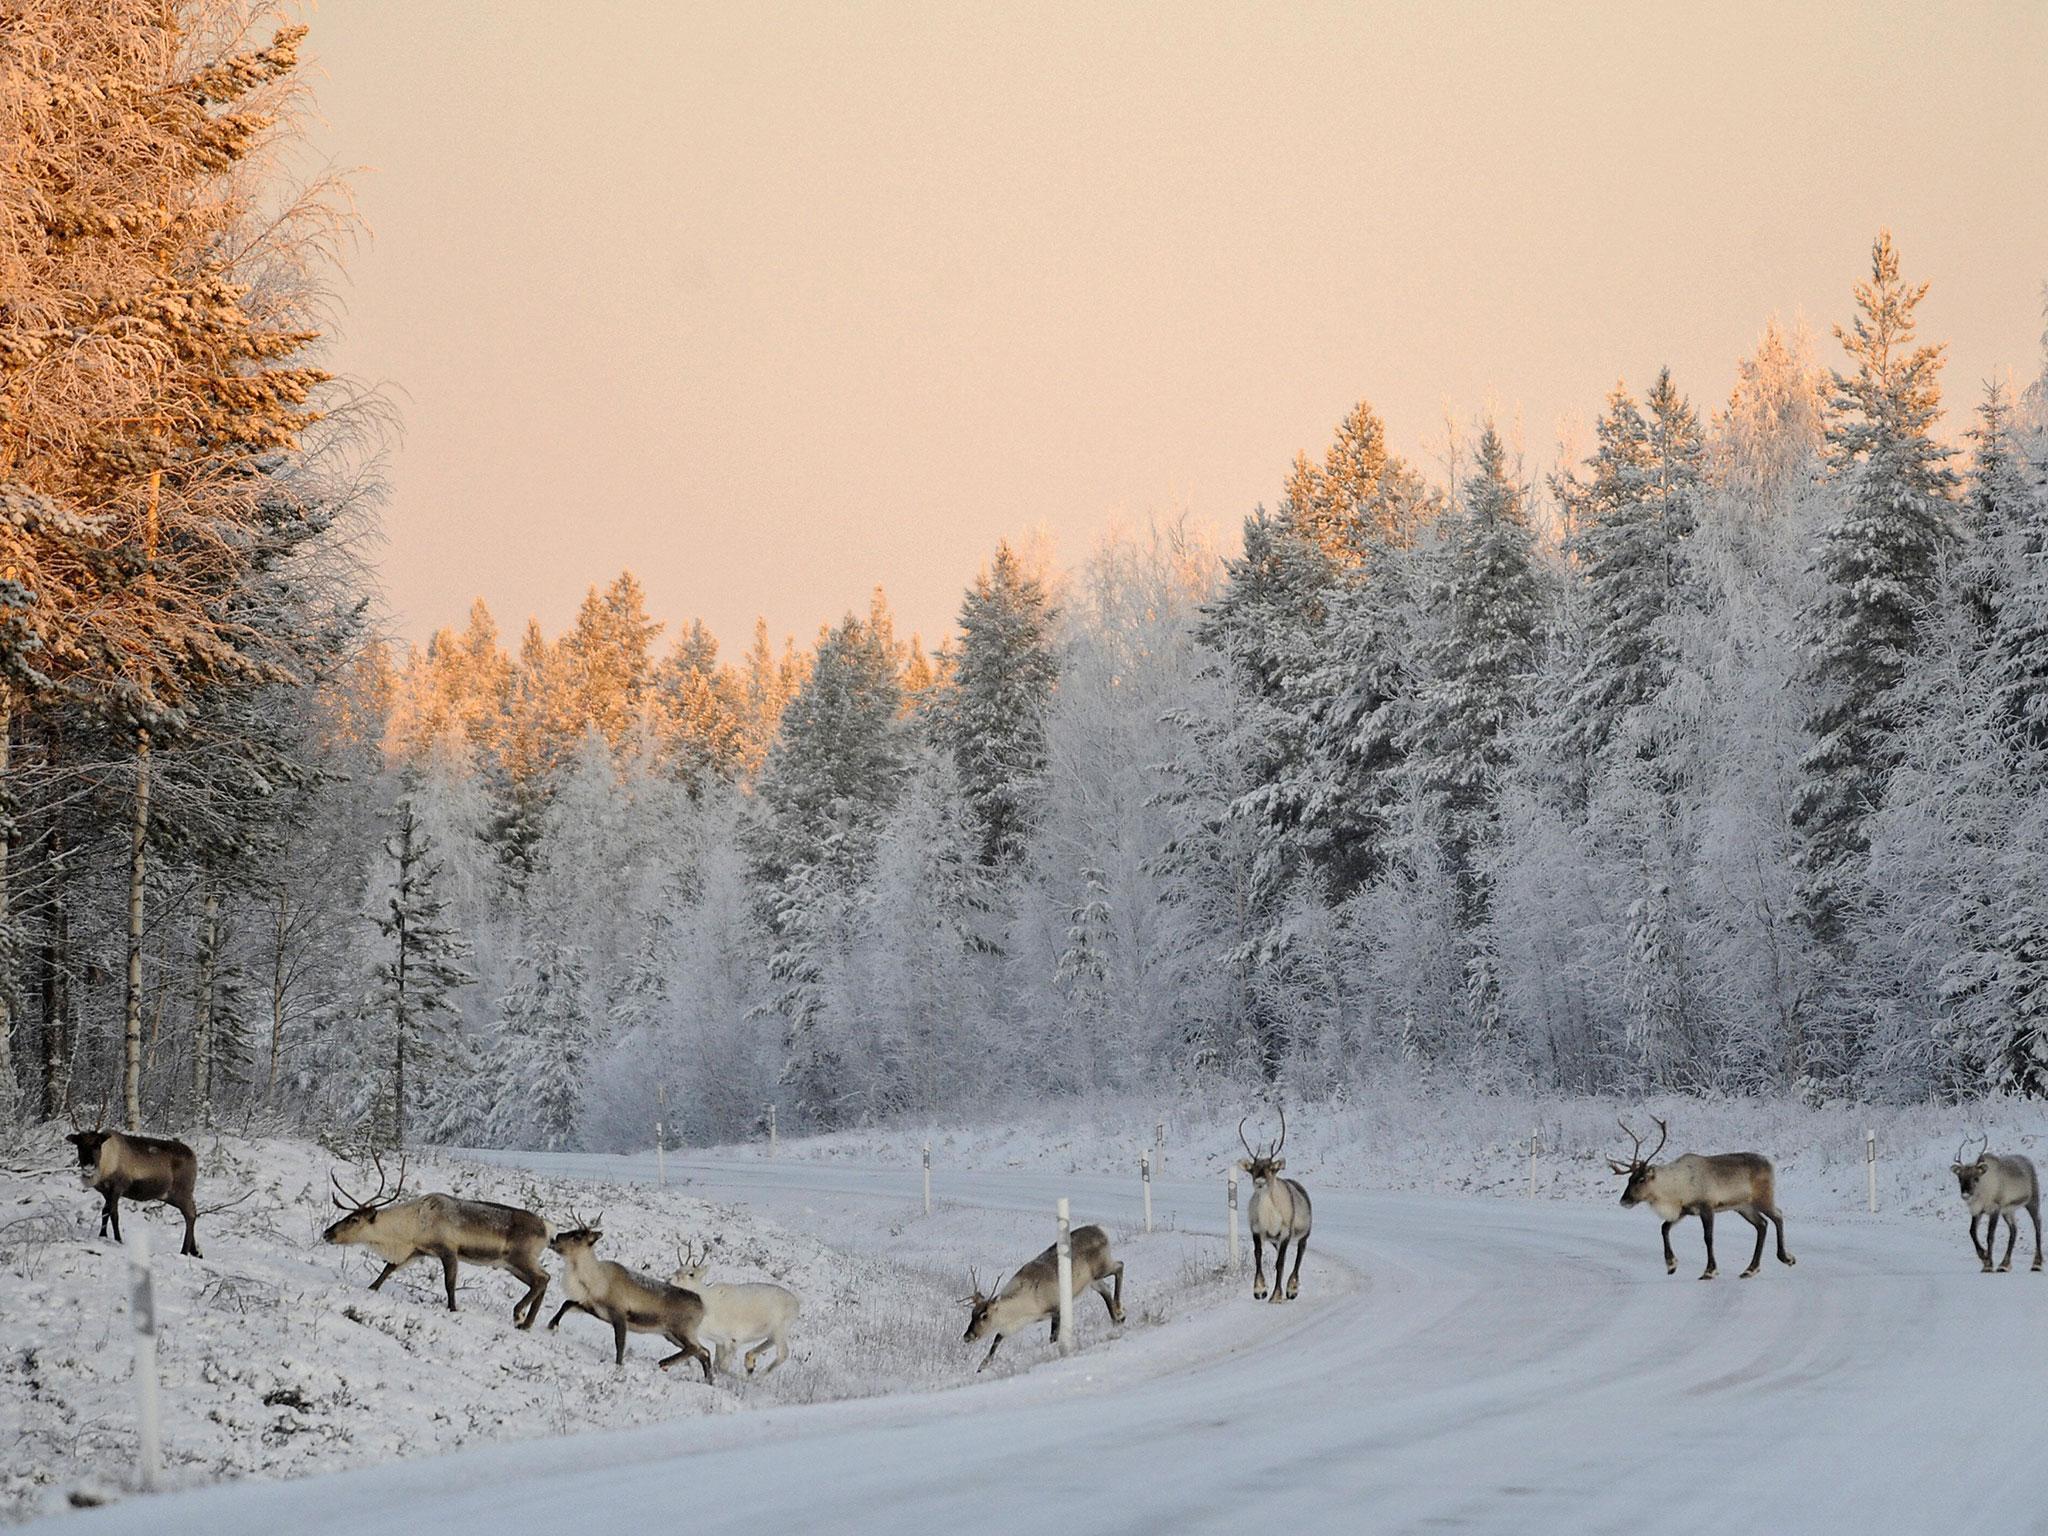 What Lapland should look like in December